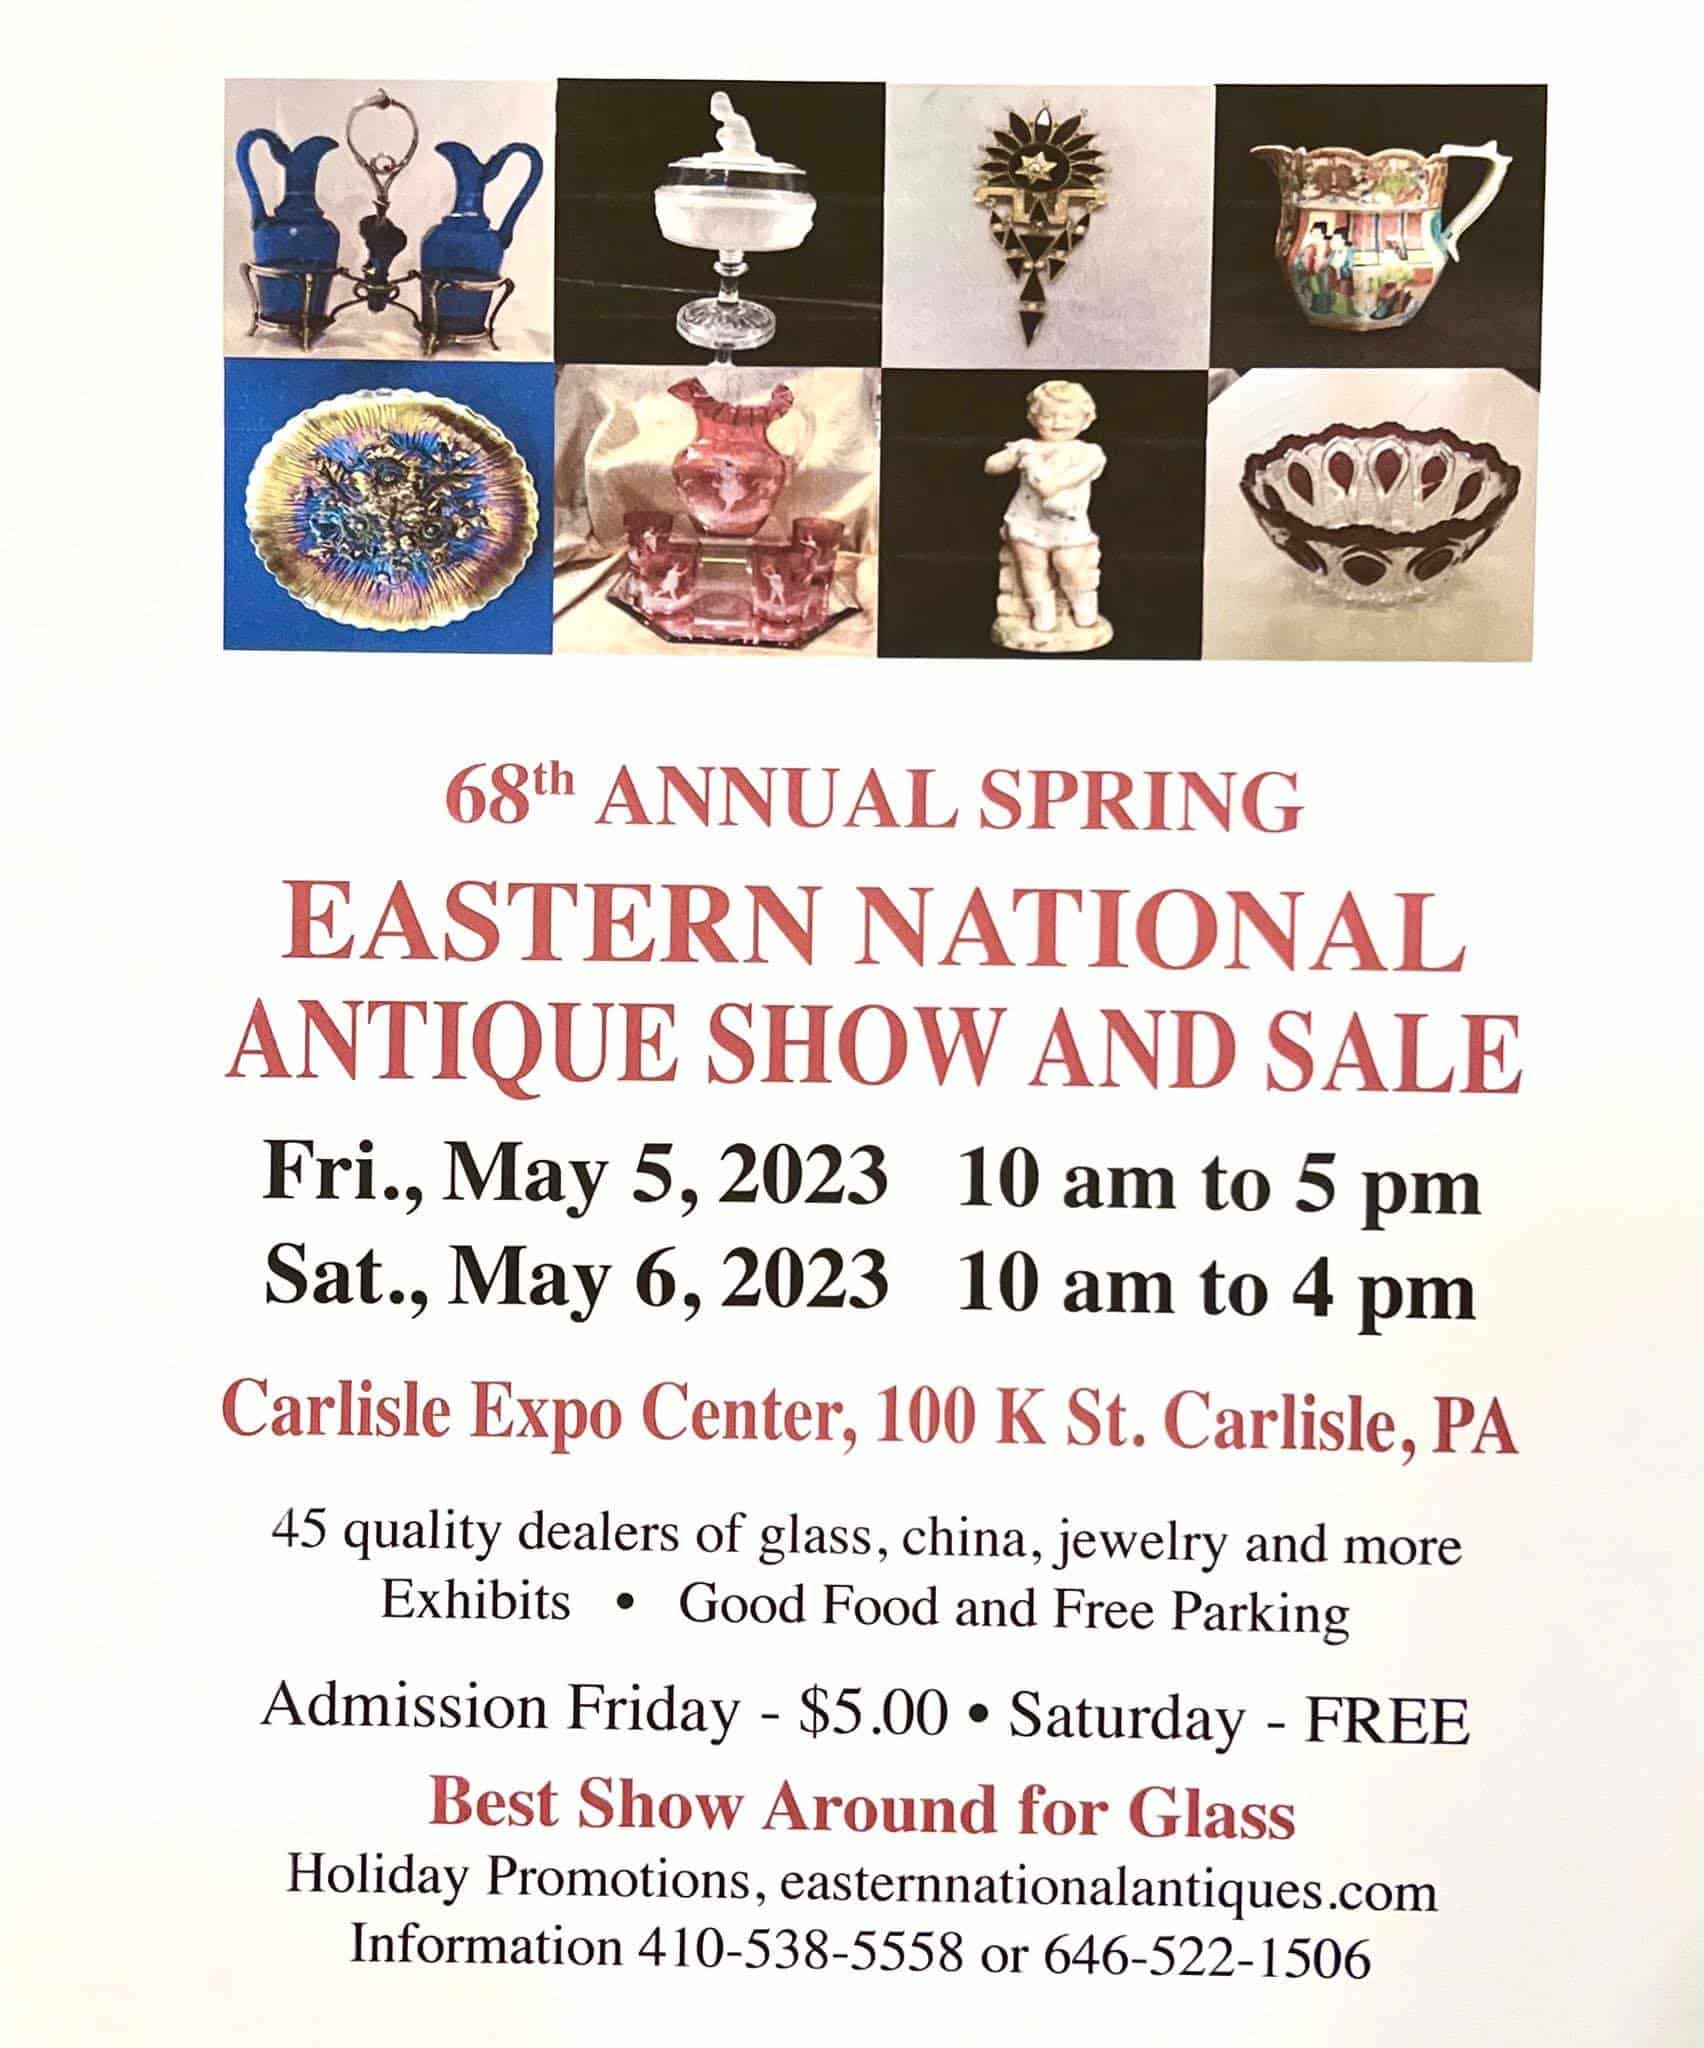 Eastern National Antique Show and Sale in Carlisle @ Carlisle Expo Center